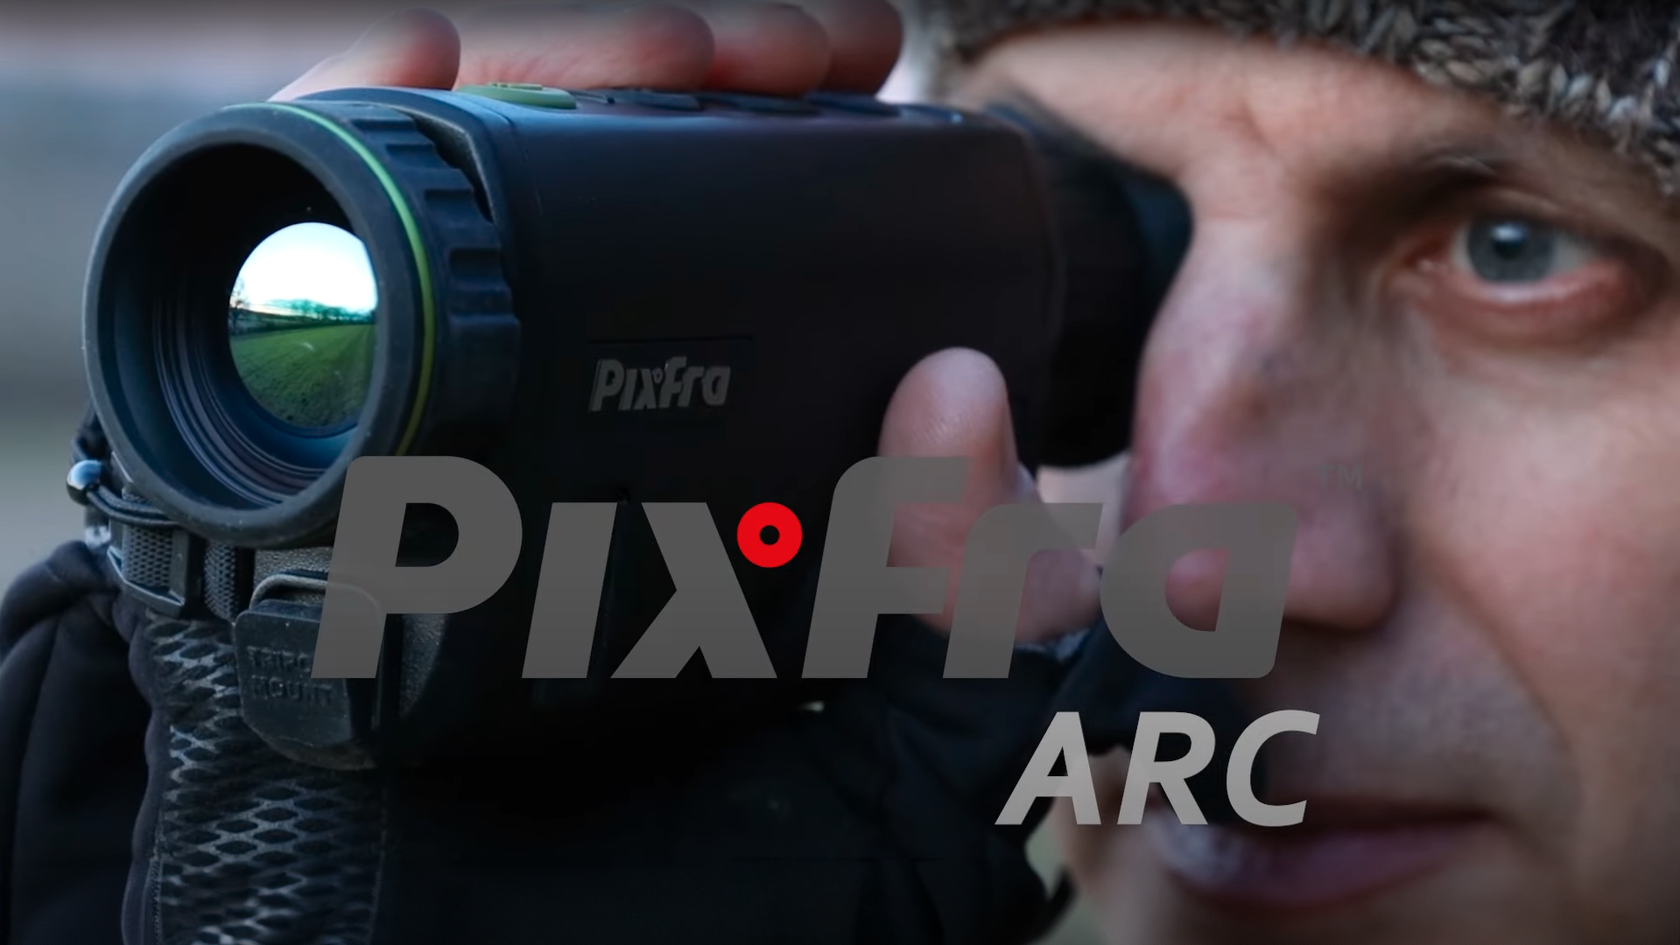 Pixfra Arc A425 - Field Test Cover Image